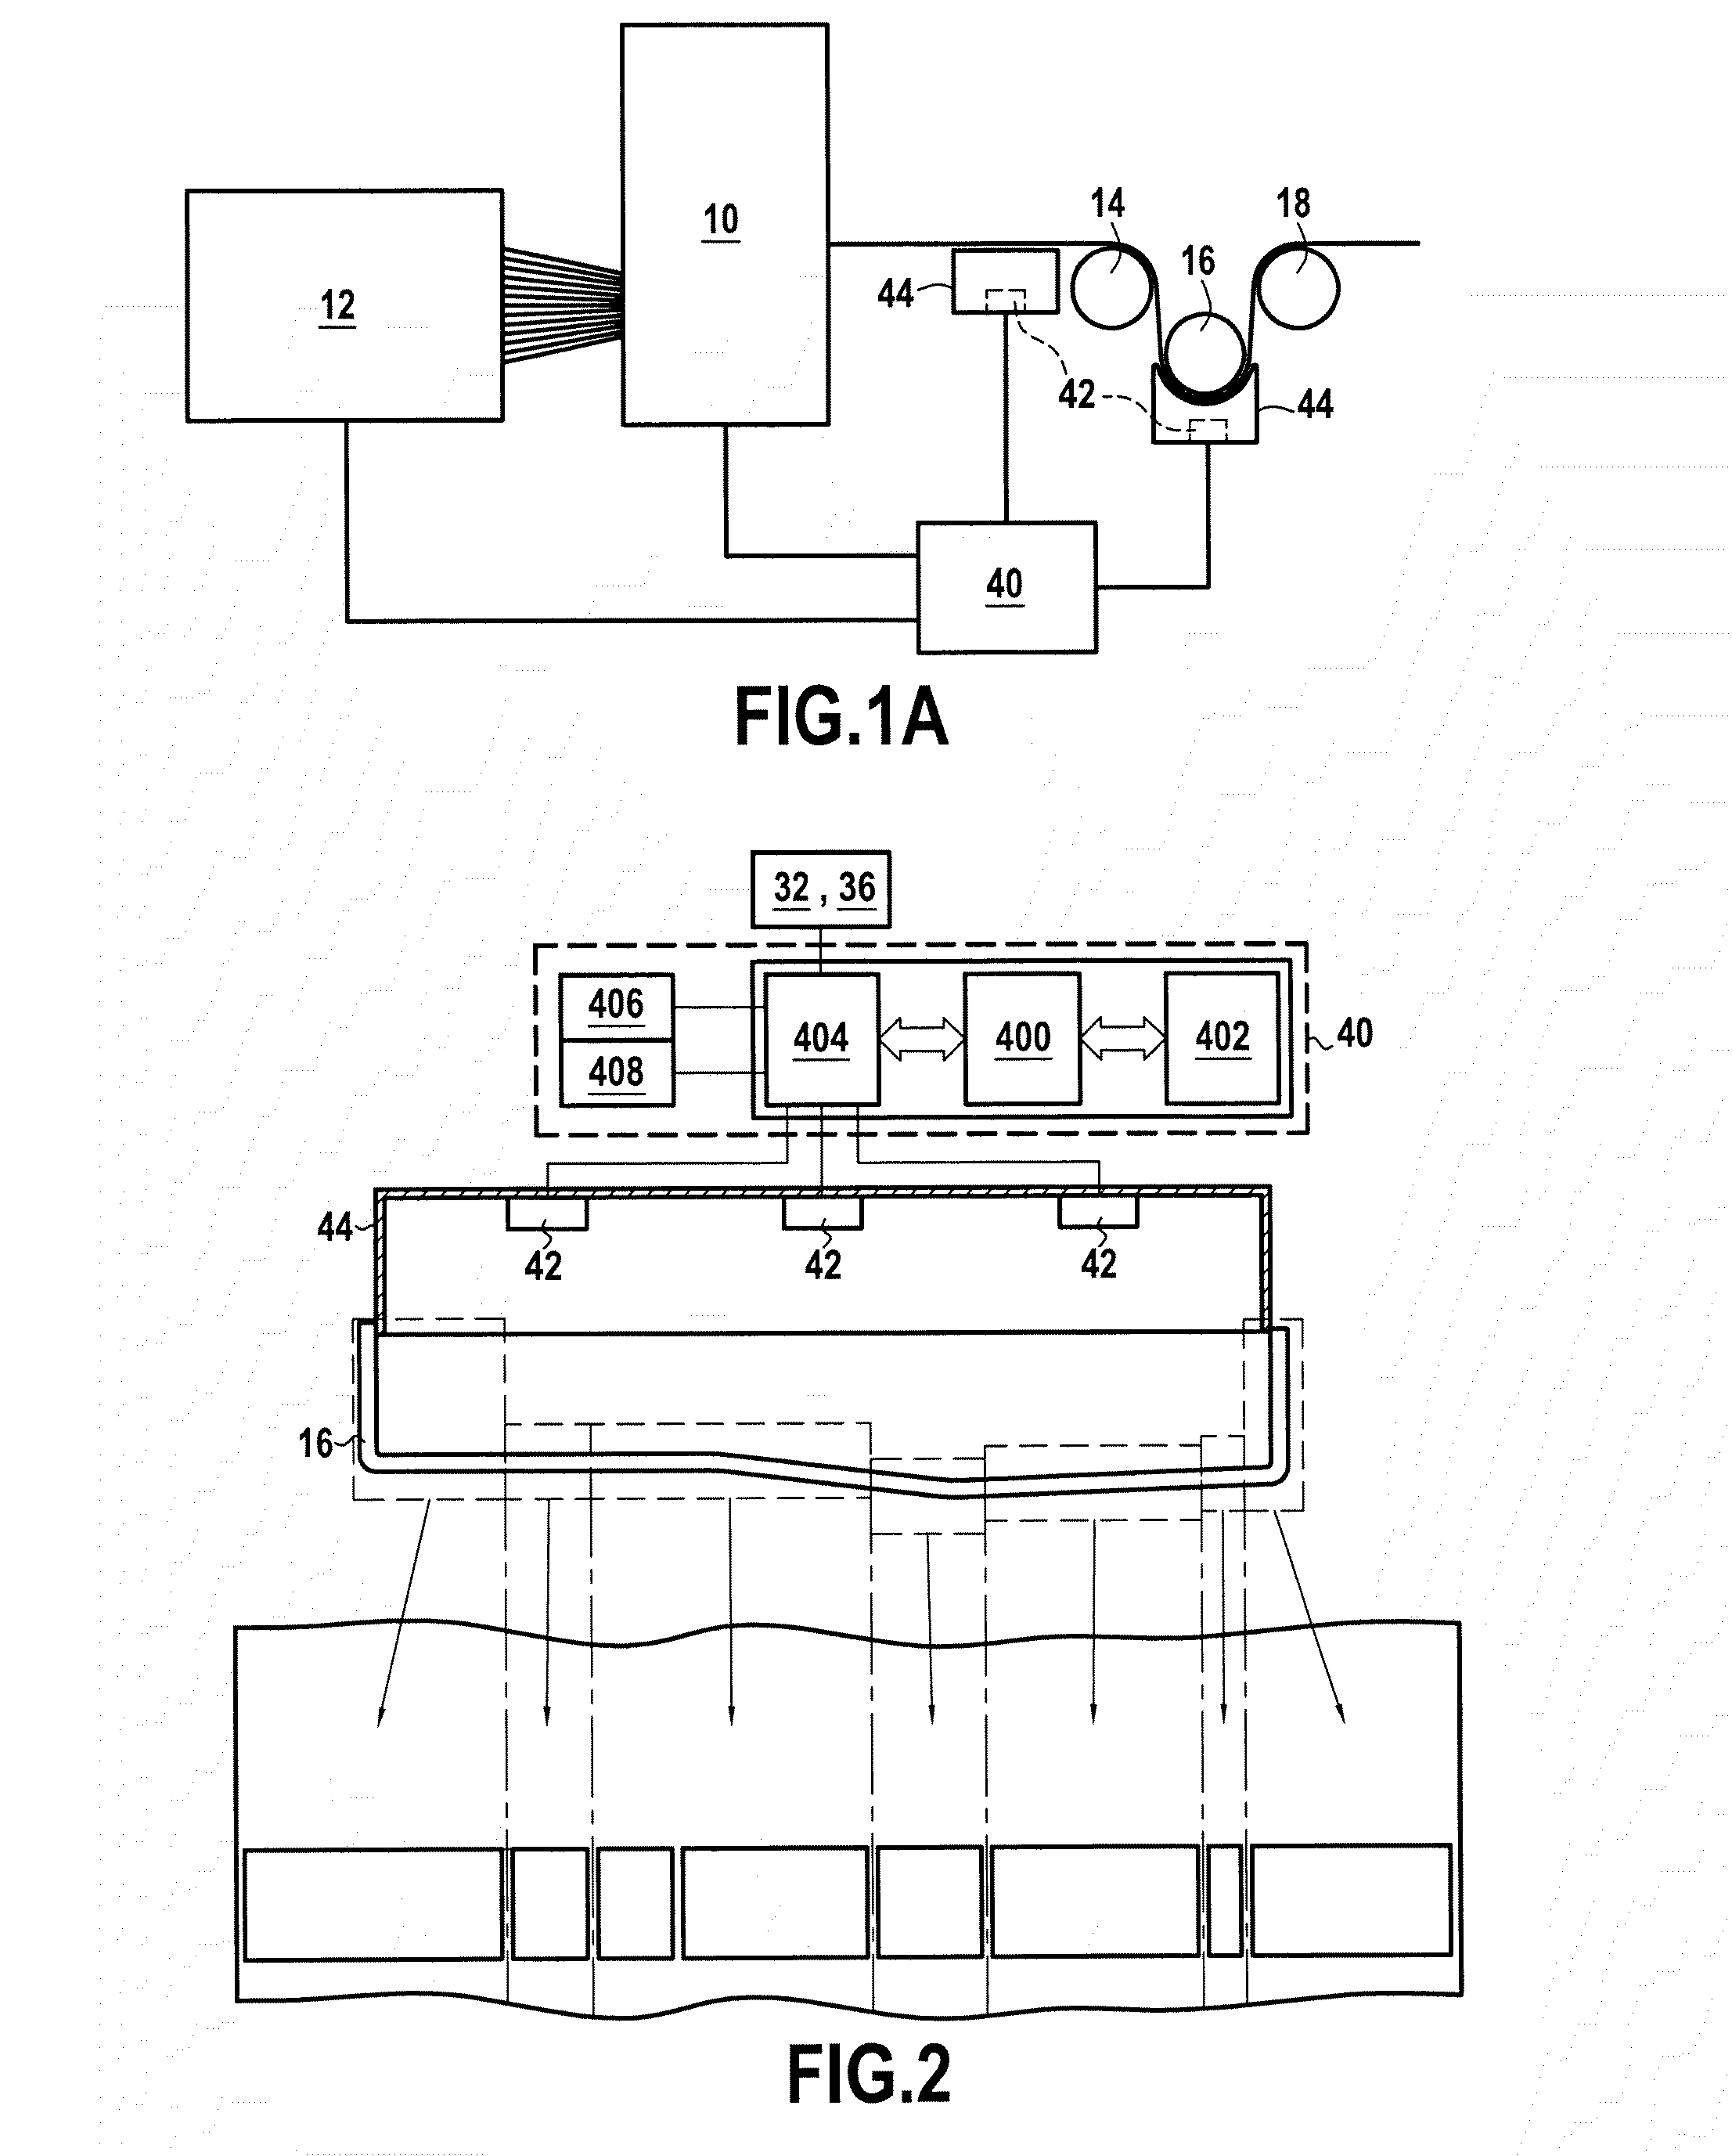 Machine for weaving or winding a fiber texture and enabling anomalies to be inspected by image analysis